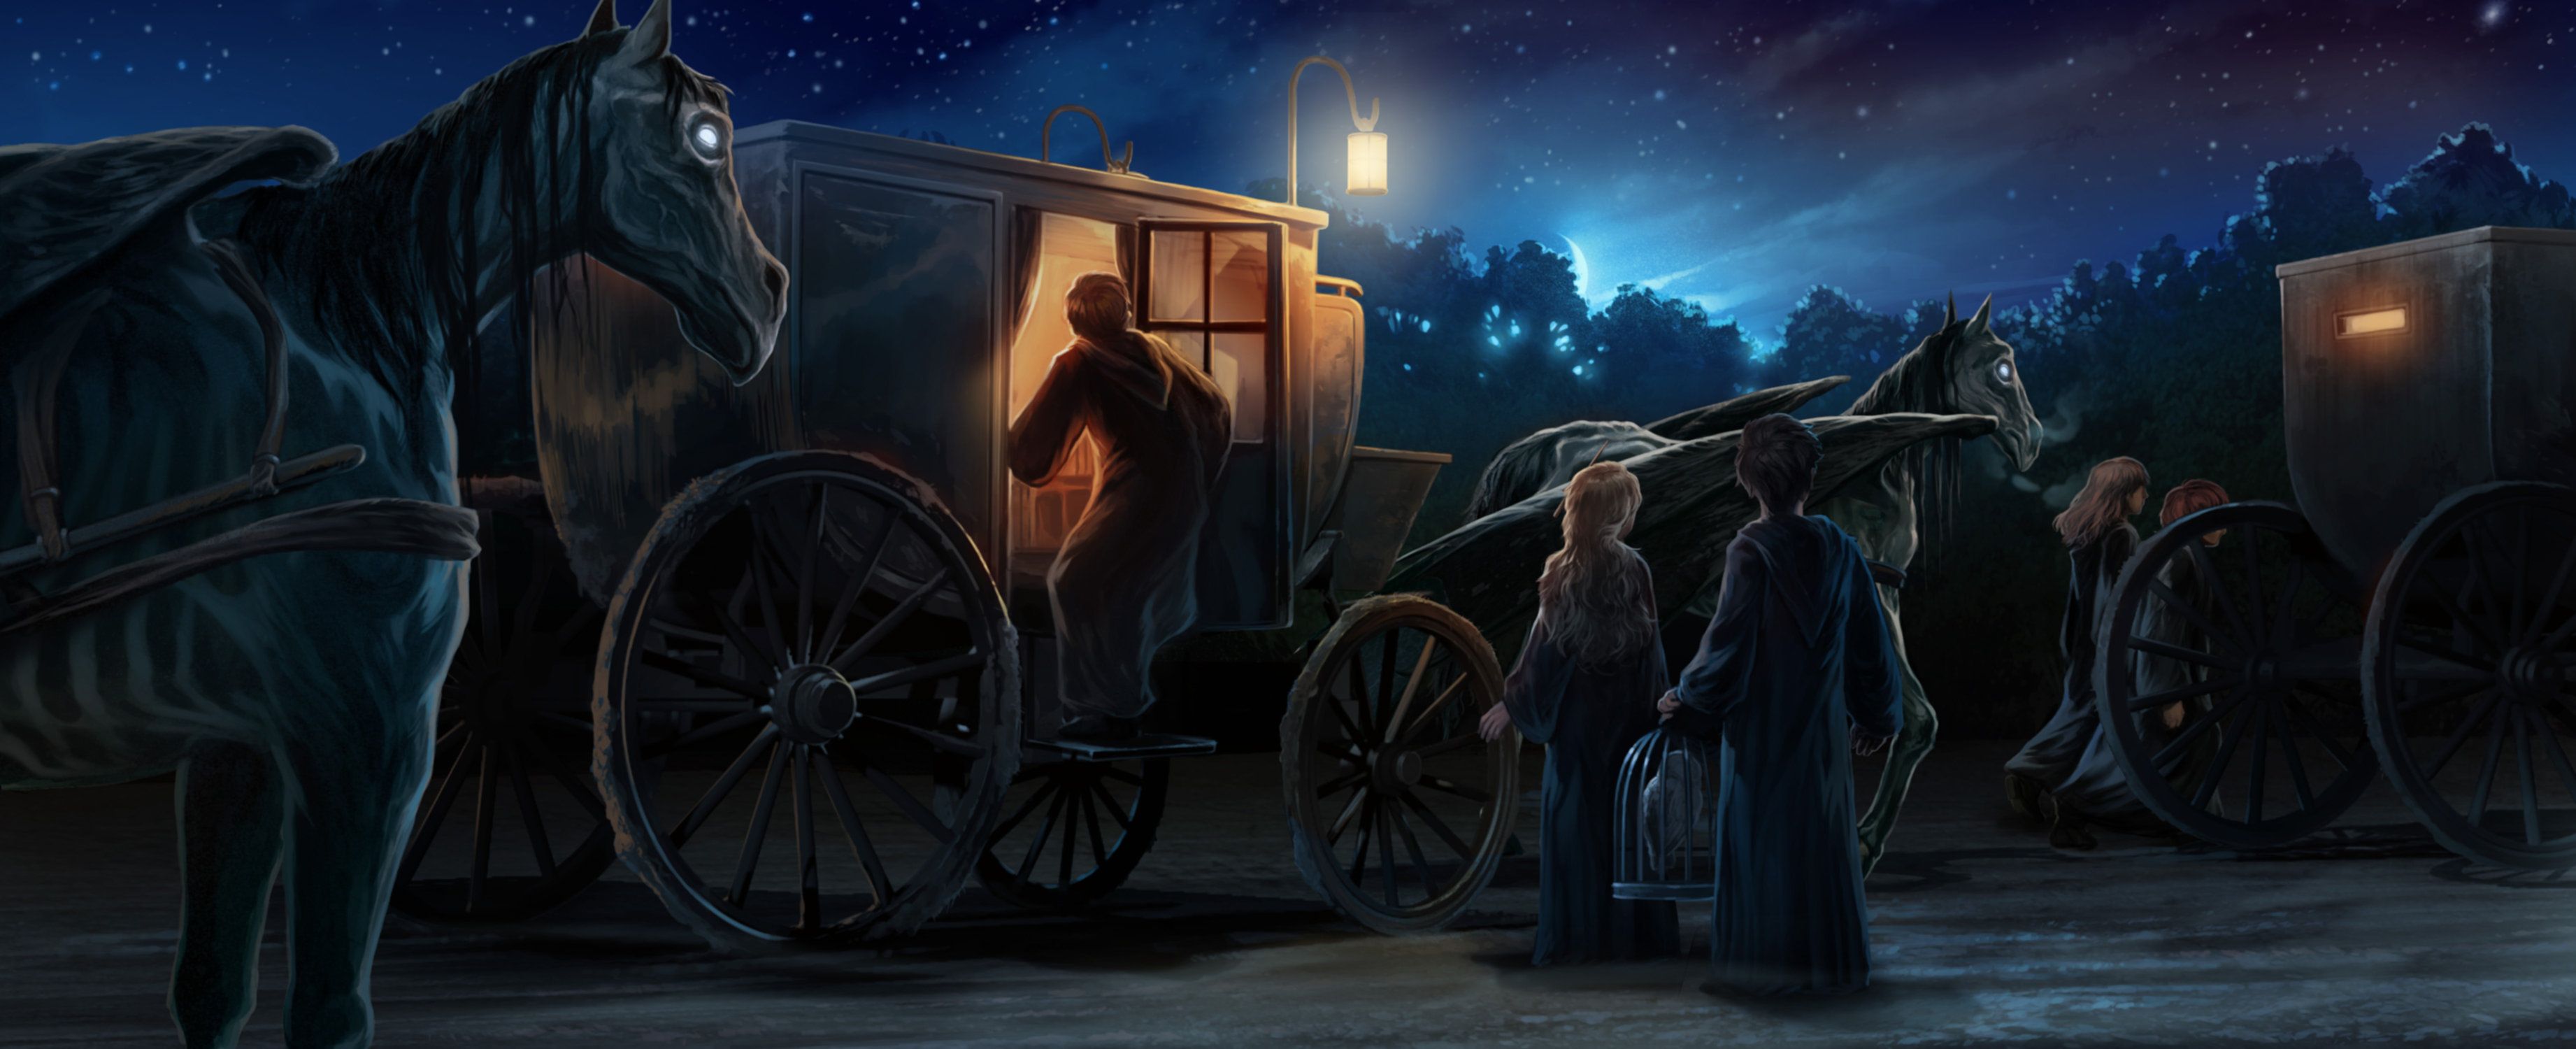 The Horseless Carriages by Atomhawk